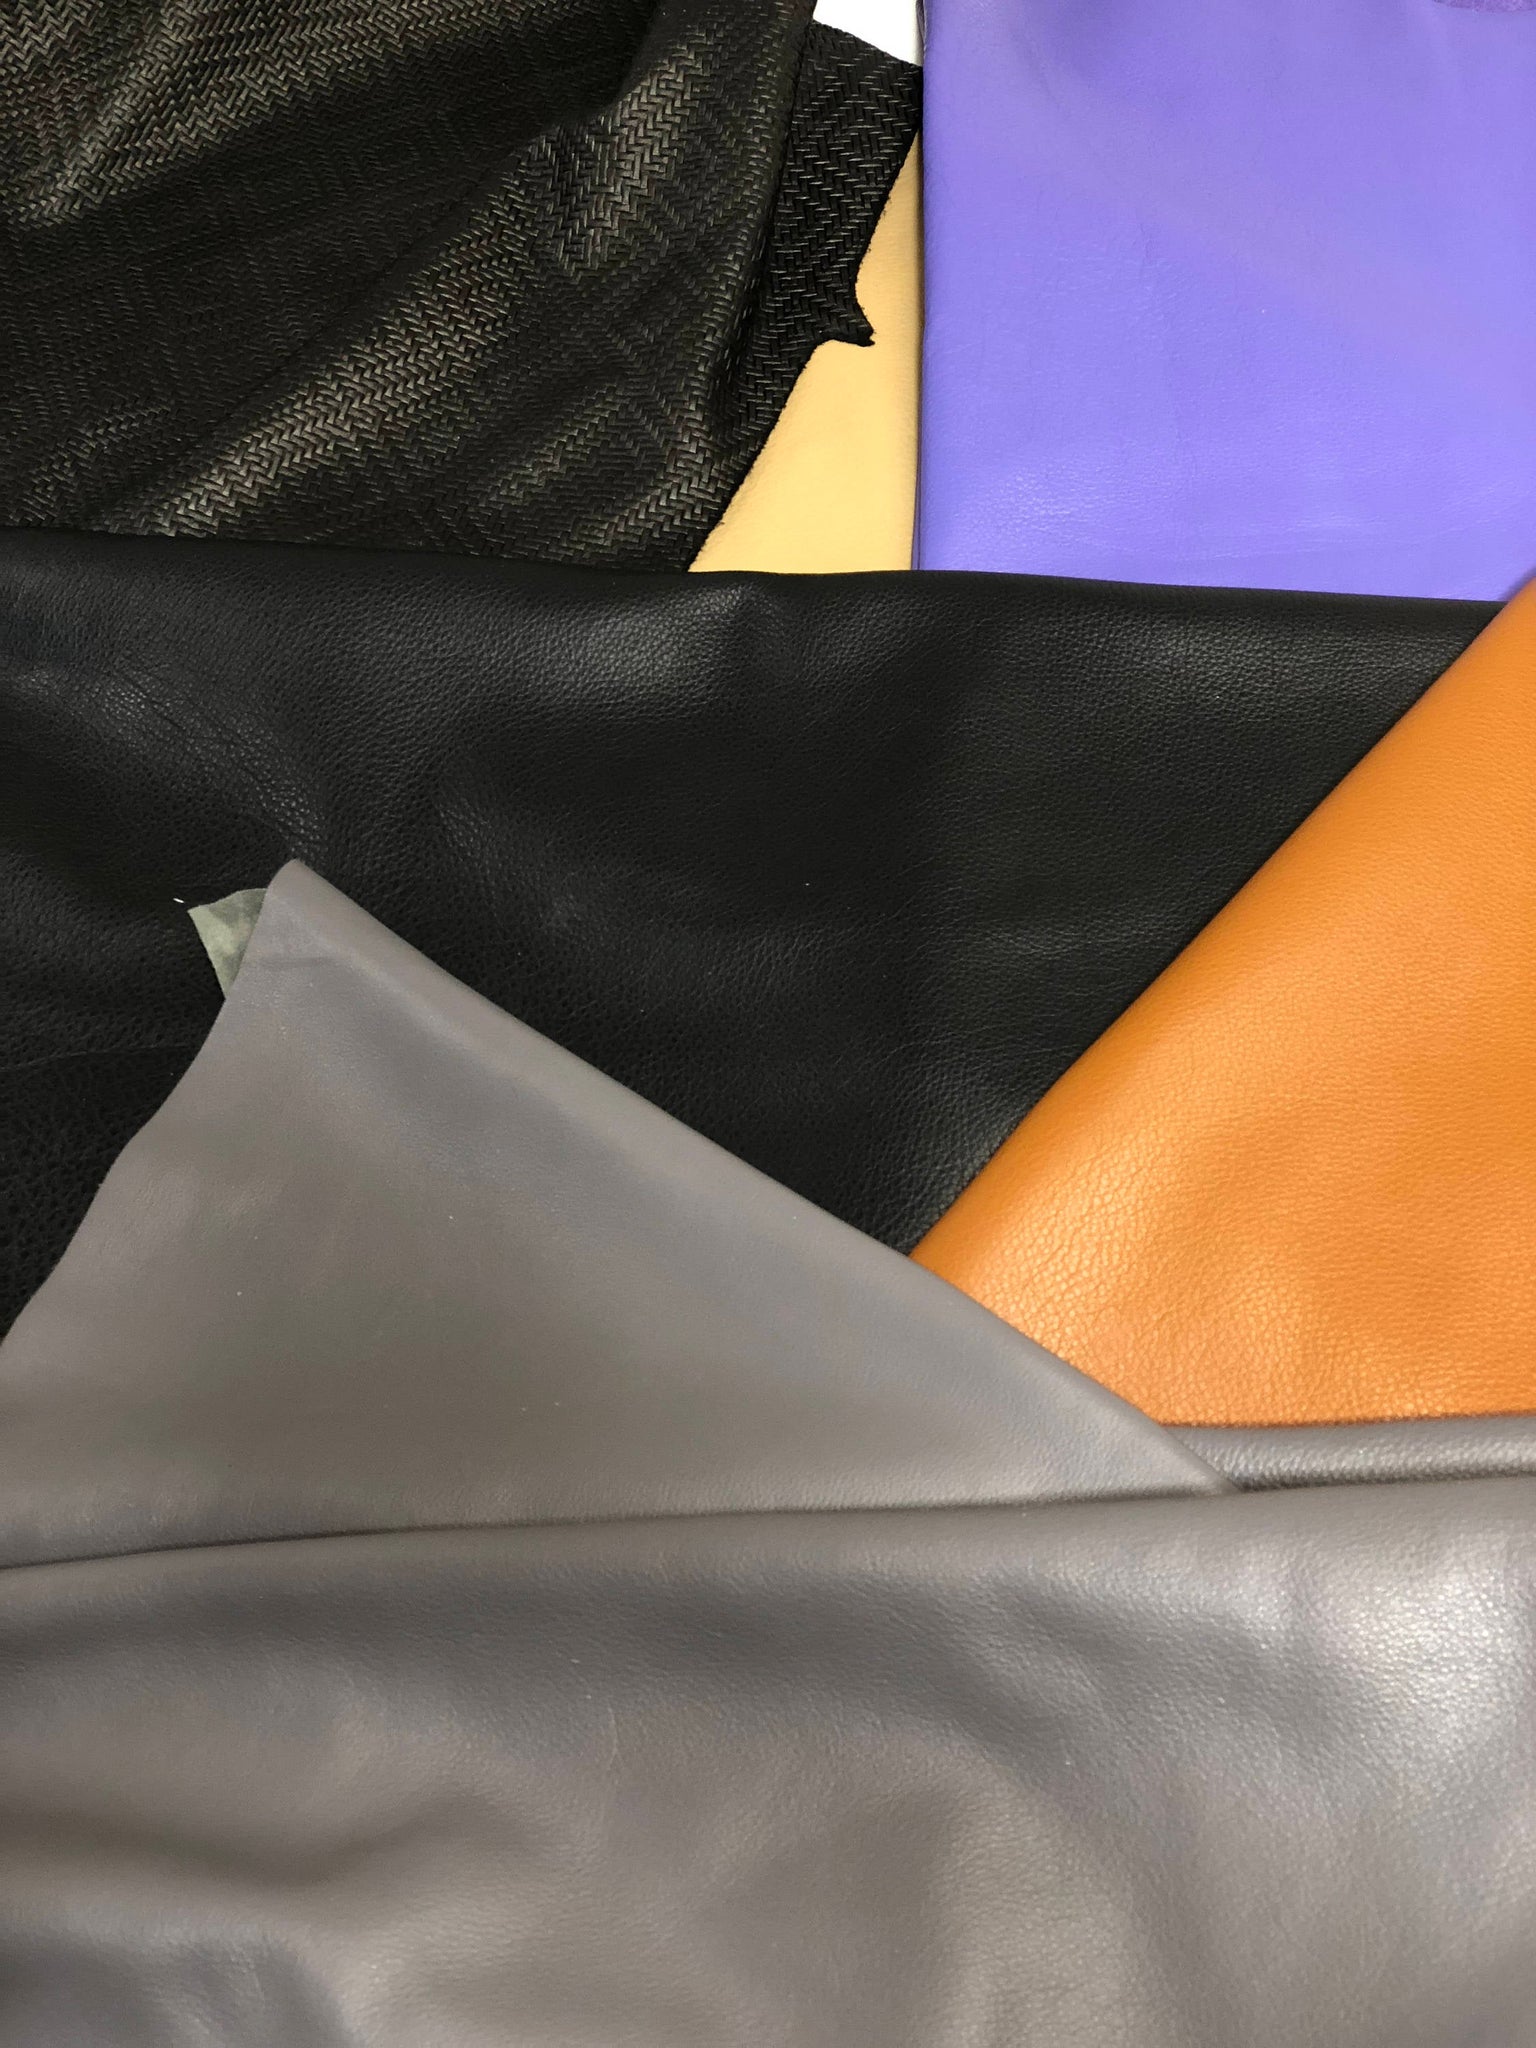 Variety Pack: 3 Skins of Miscellaneous Colors in Cow Leather